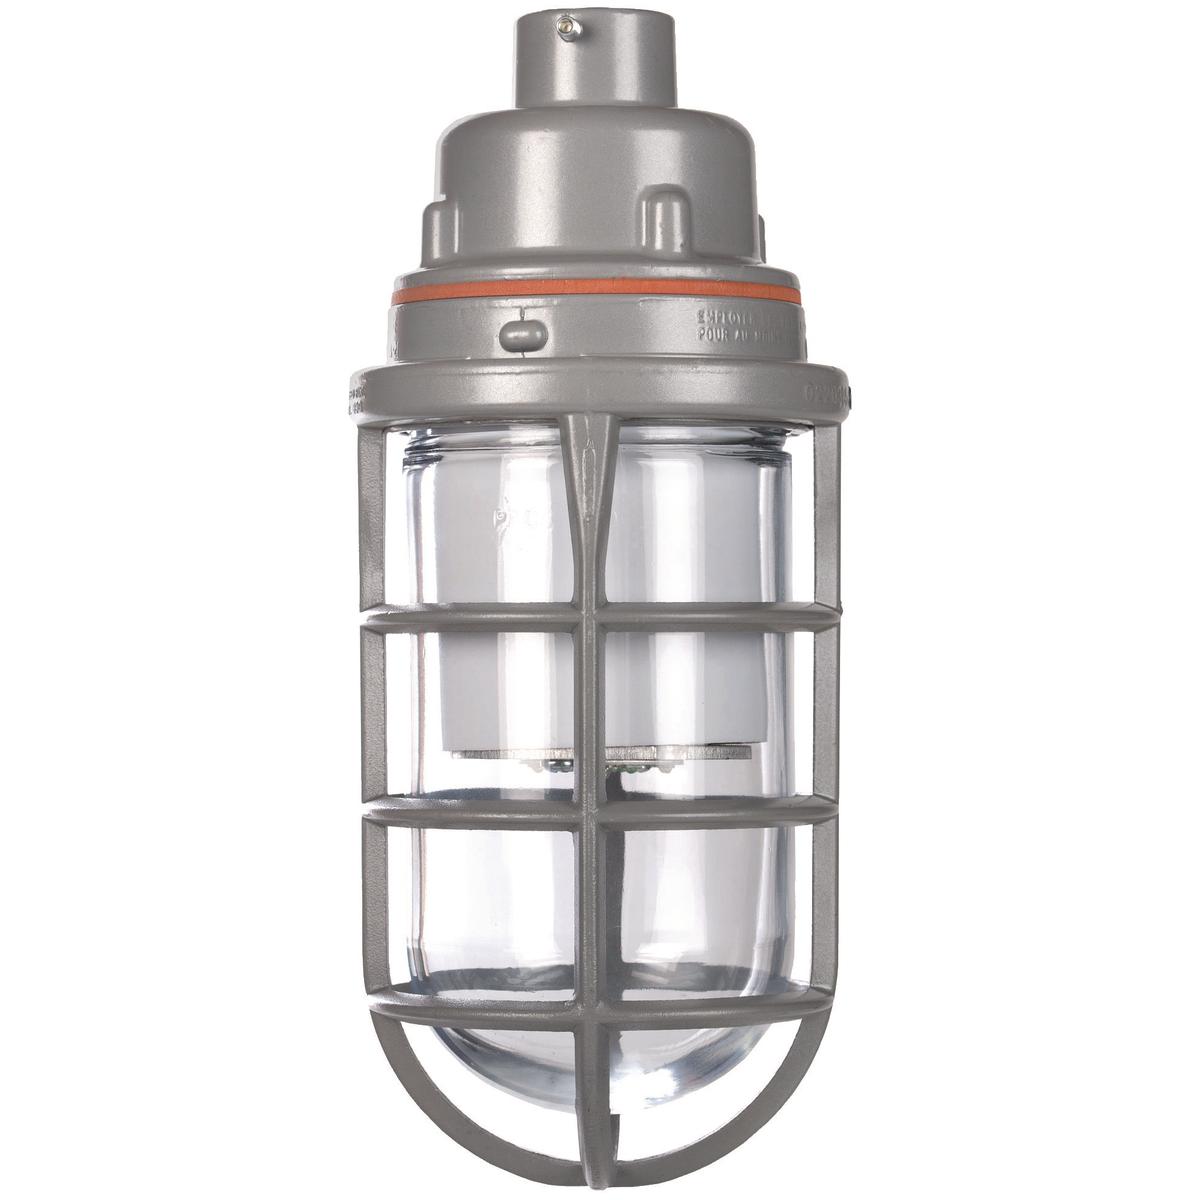 Hubbell VSL1330A2SG The VSL Series is a Vapor Tight/ Utility fixture using energy efficient LED's. This fixture is made with a cast copper-free aluminum housing and mount that is  suitable for harsh and hazardous environments. With the design of this fixtures internal heat s